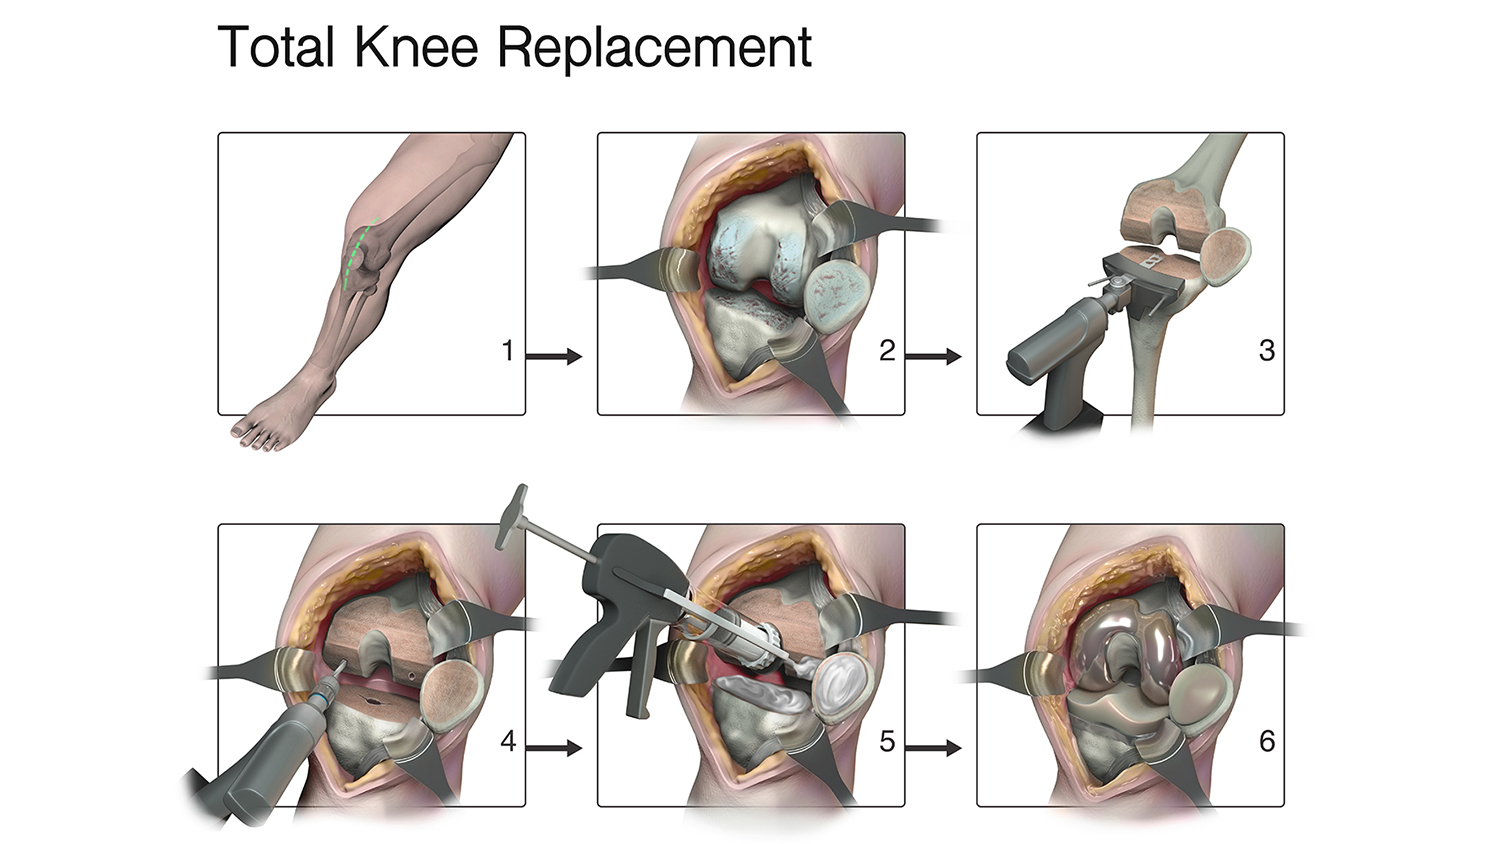 An illustration of a total knee replacement